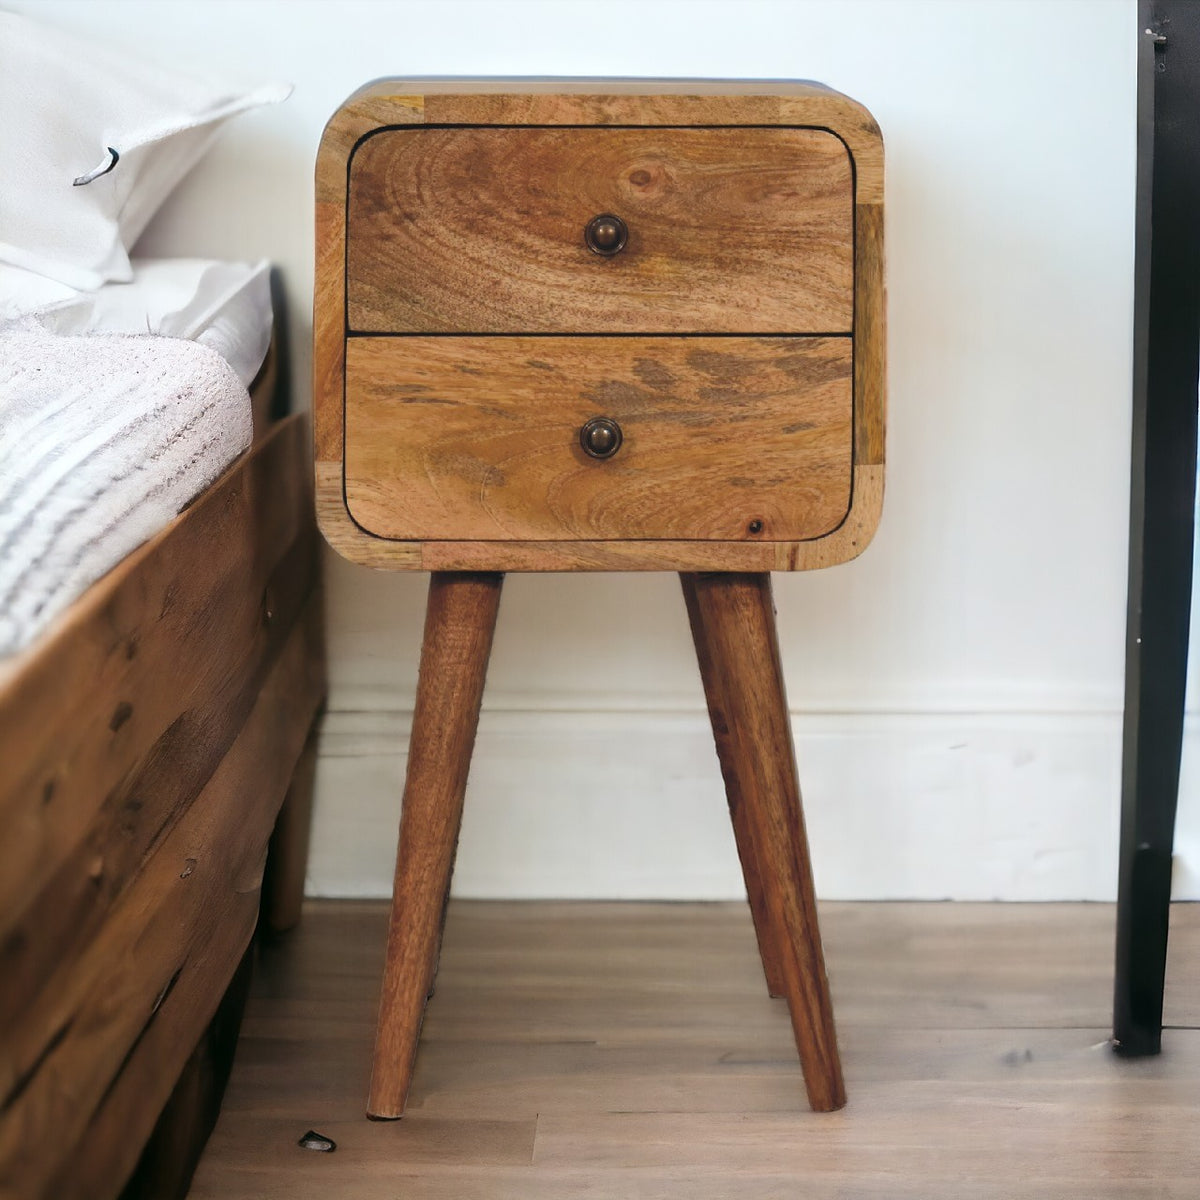 small wooden bedside table uk compact nightstand petite bedside table slim bedside table uk space saving bedside table online uk London